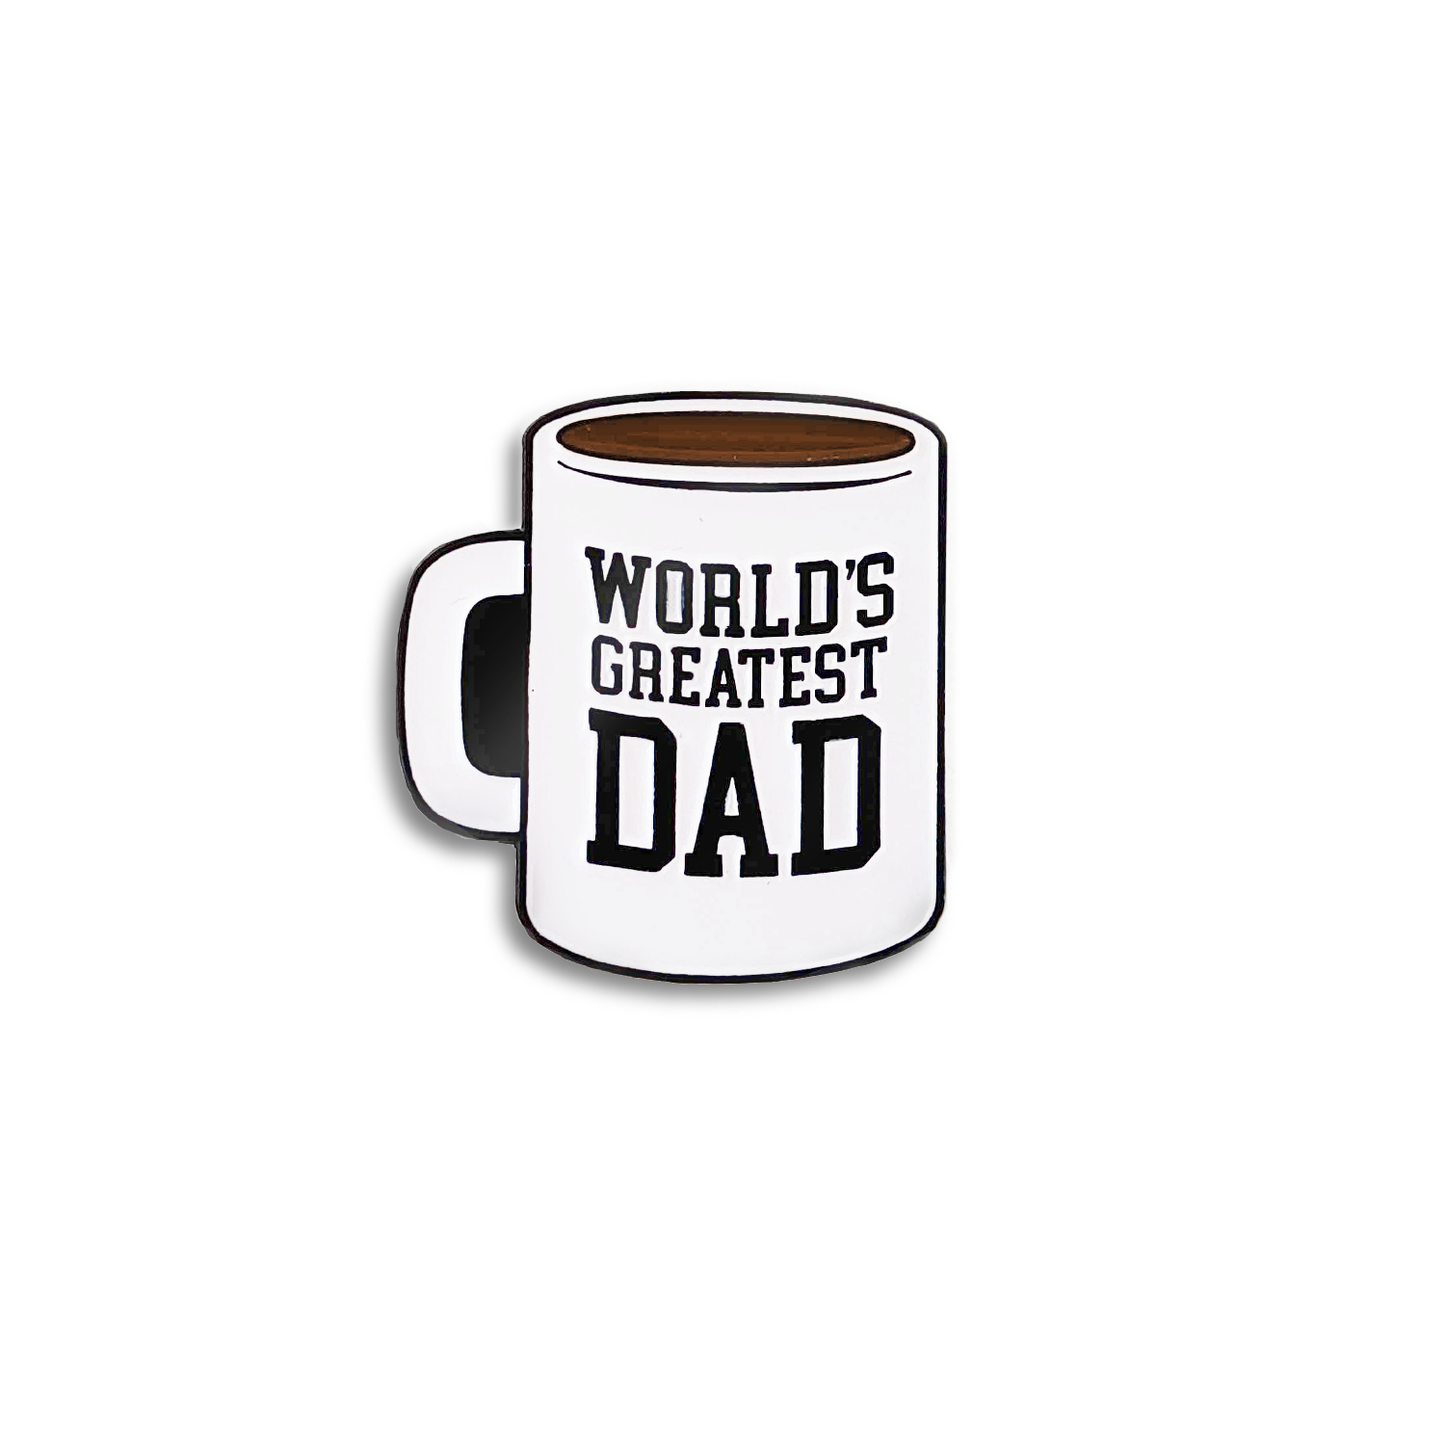 An enamel pin in the shape of a white coffee mug. There is coffee in the mug, and it is printed with the phrase "World's Greatest Dad" in bold black font.